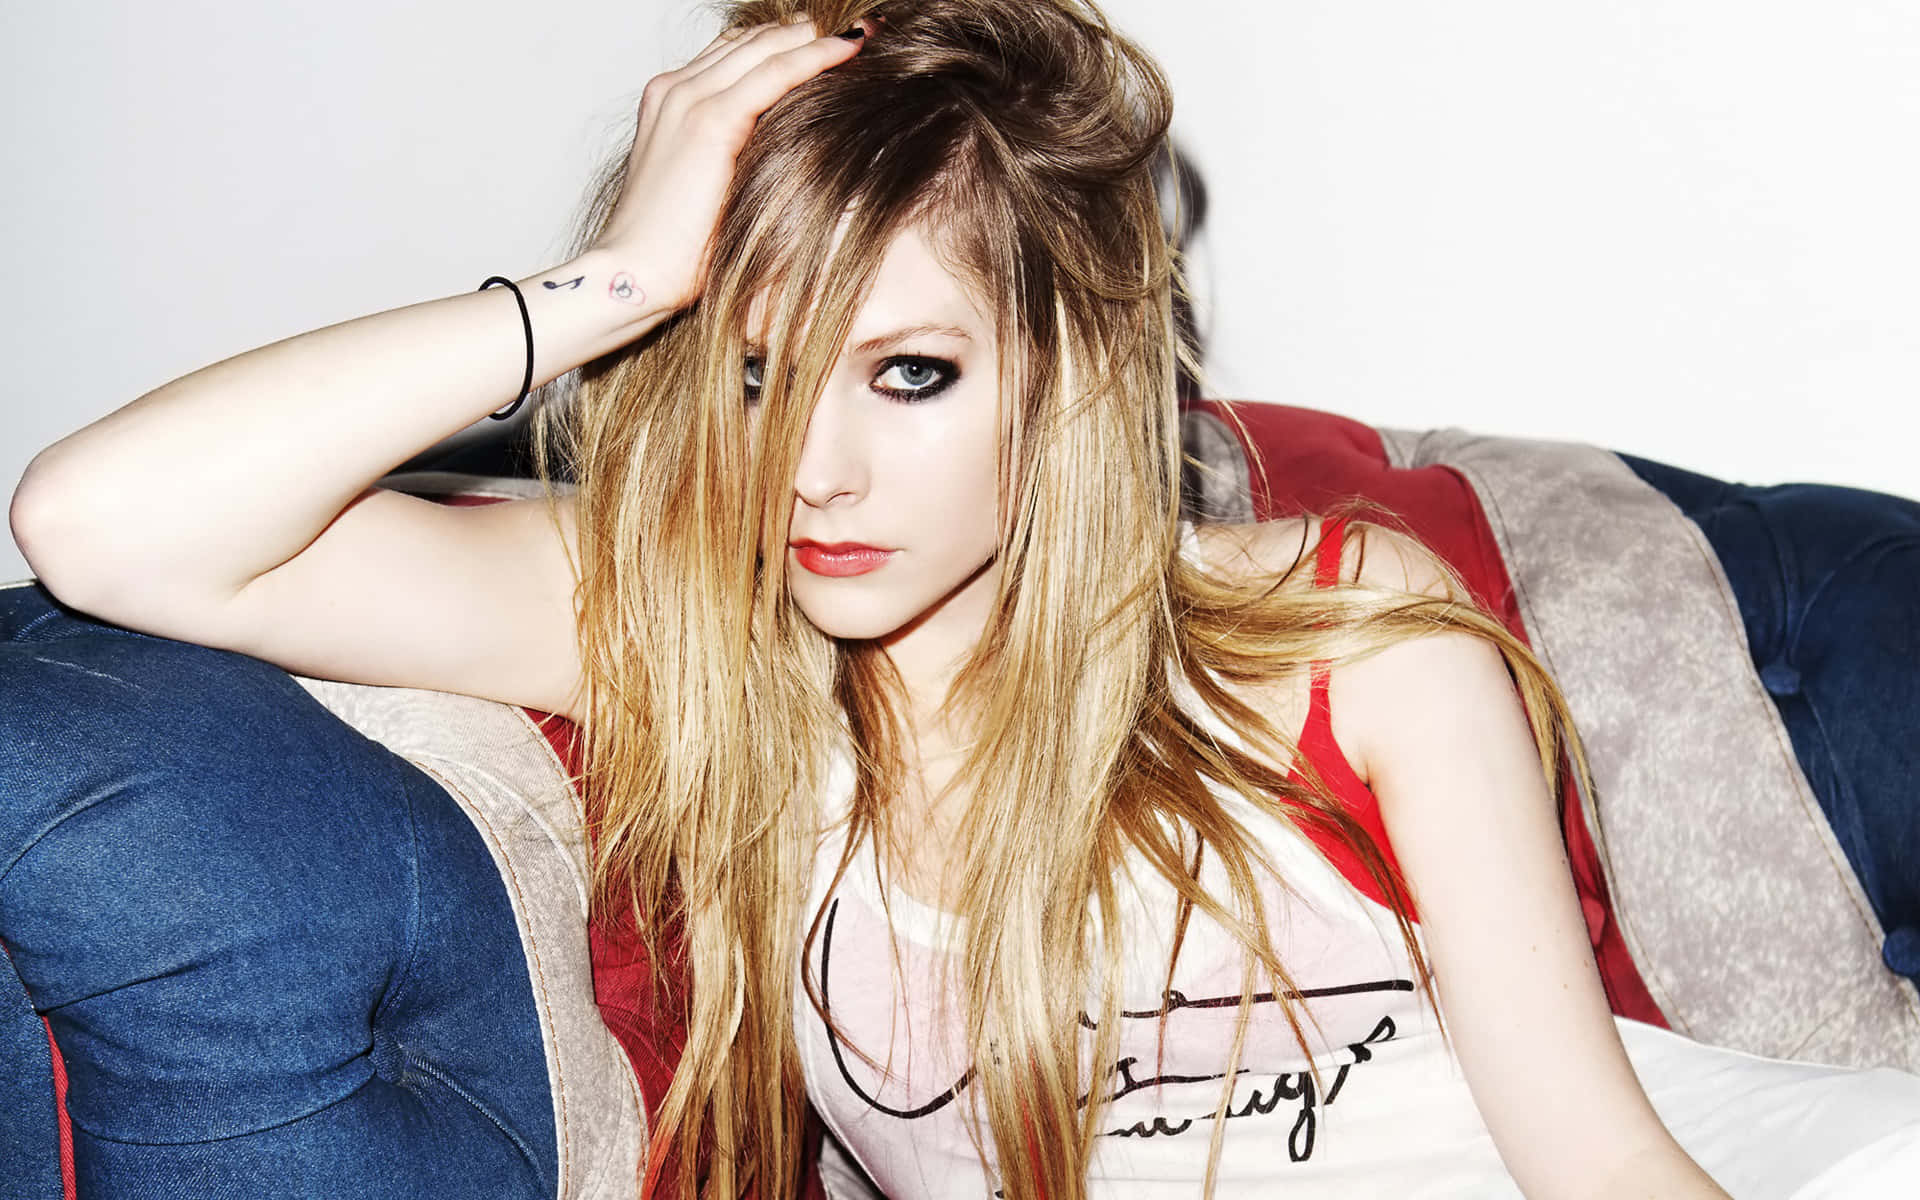 Avril Lavigne in her iconic 'Complicated' Music Video